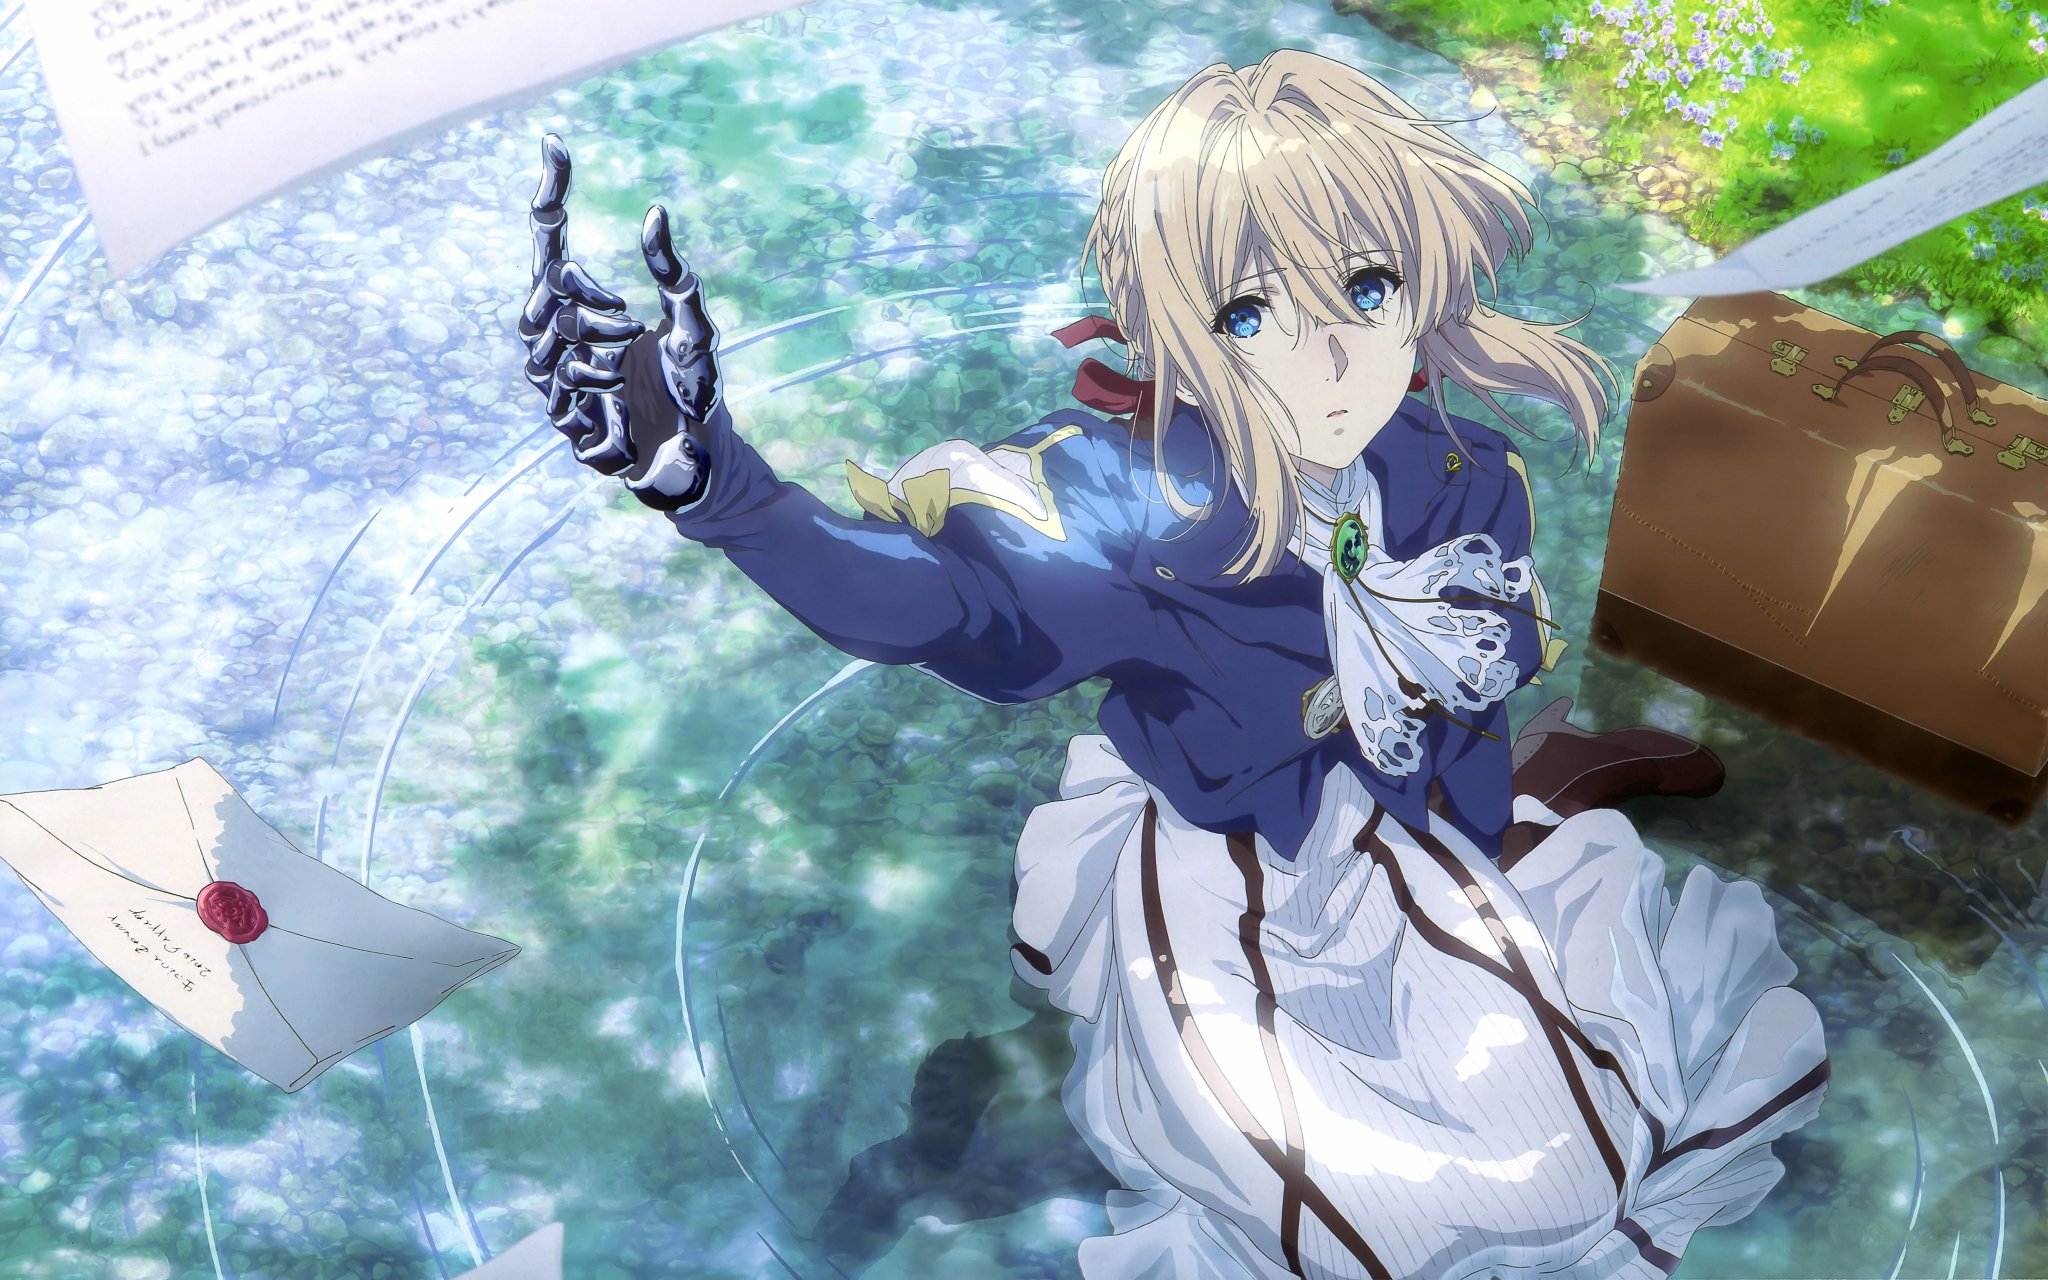 Kvin I Was Scrolling Through The Extras For The Violet Evergarden Gaiden And The Main One That Many Stores Are Using Variations Of Is An Old Illustration By